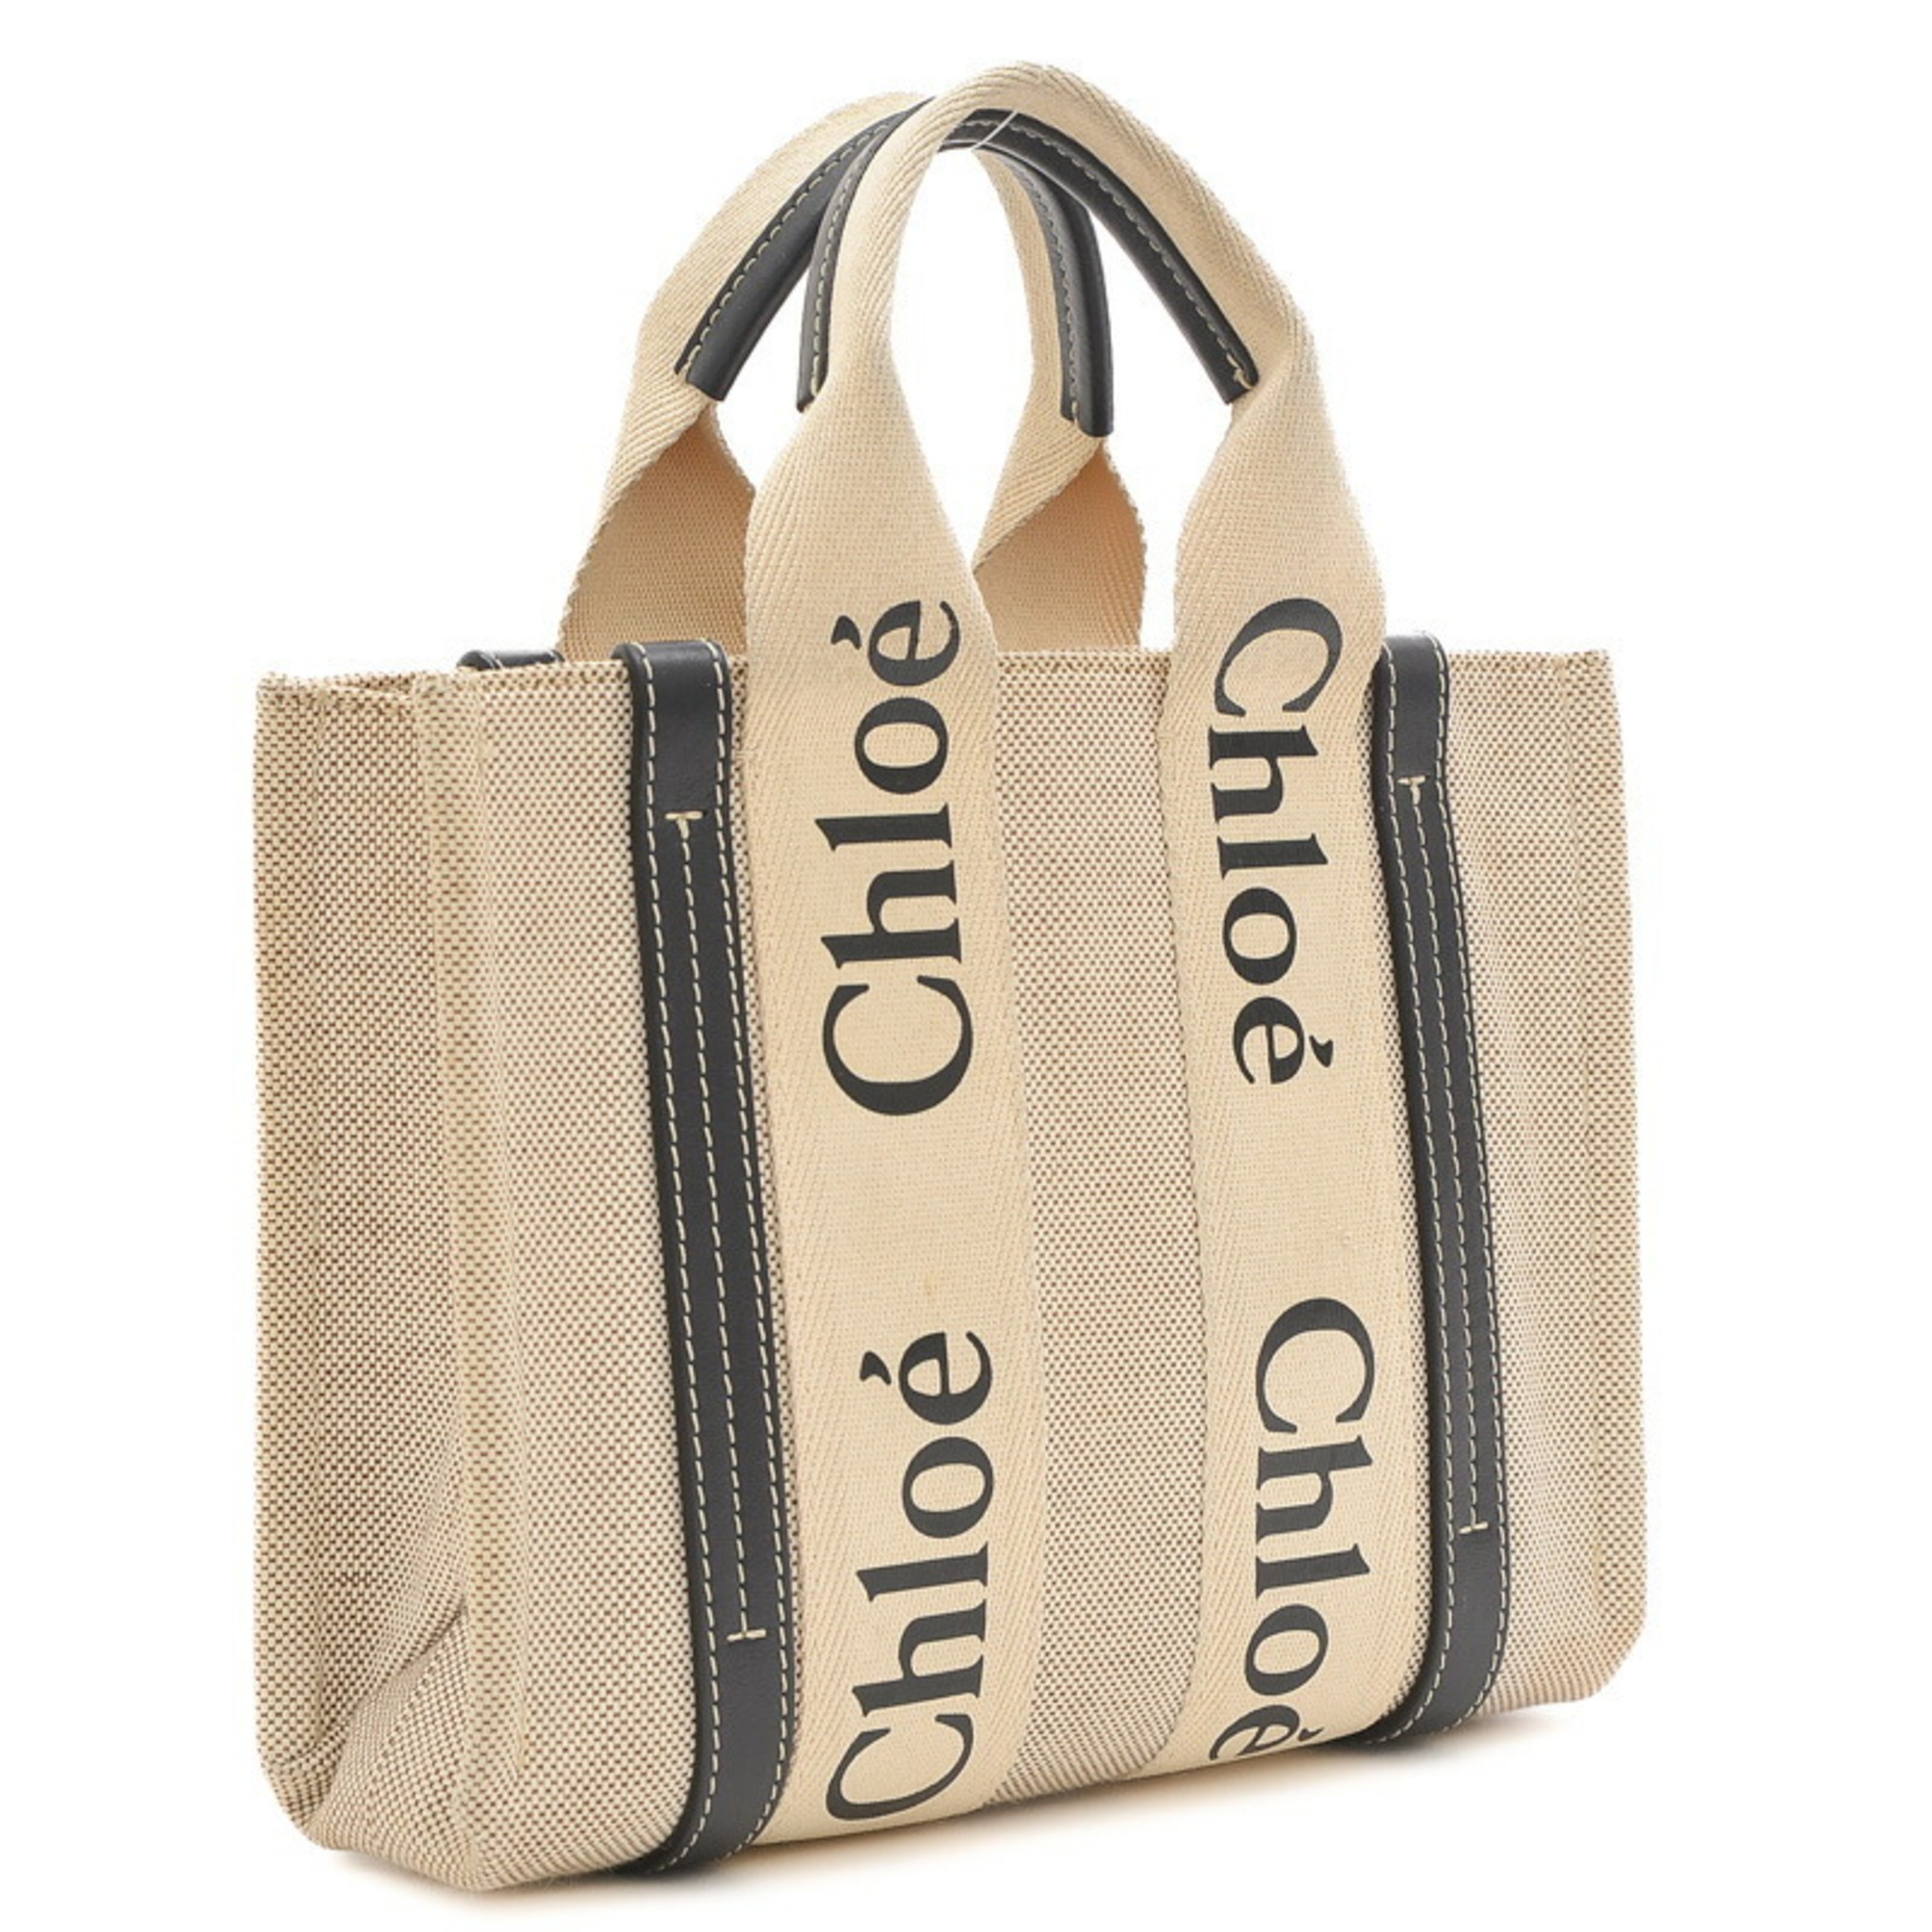 Chloé Chloe Woody Small Tote Bag Canvas Leather Beige Black